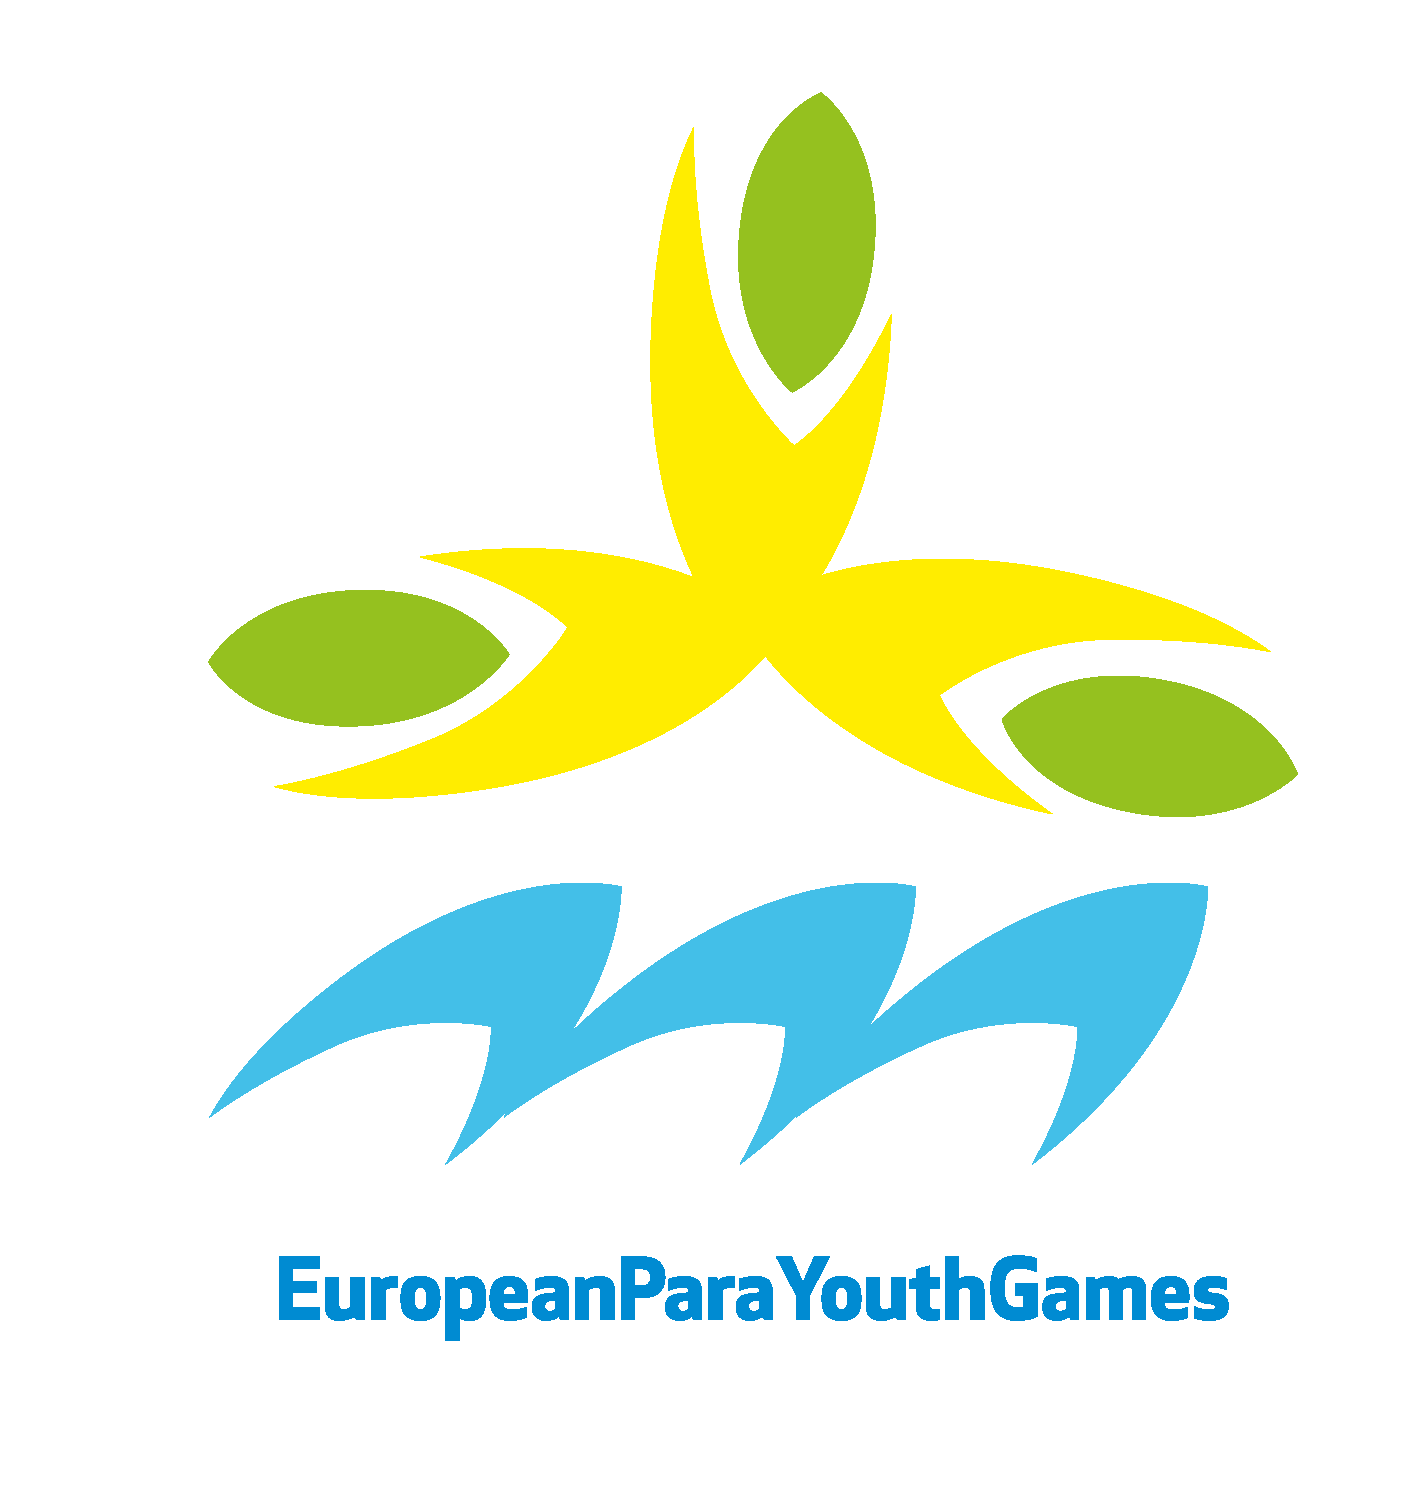 European Para Youth Games logo, with yellow, green, and blue features above the wording 